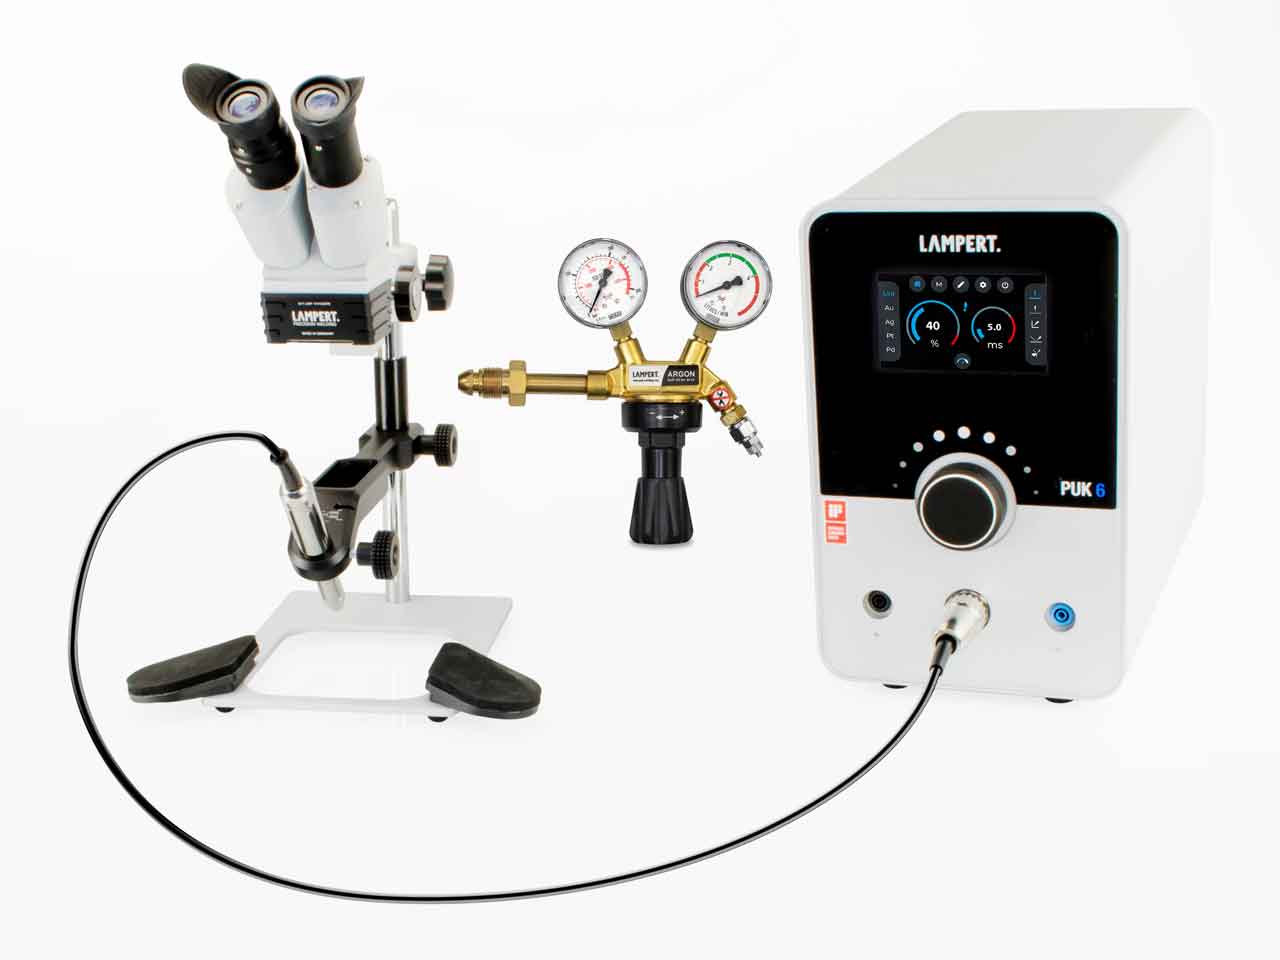 Do you have instructions for Lampert Puk 6 Tig Welder With Sm6 X10 Magnification Microscope And Argon Regulator?